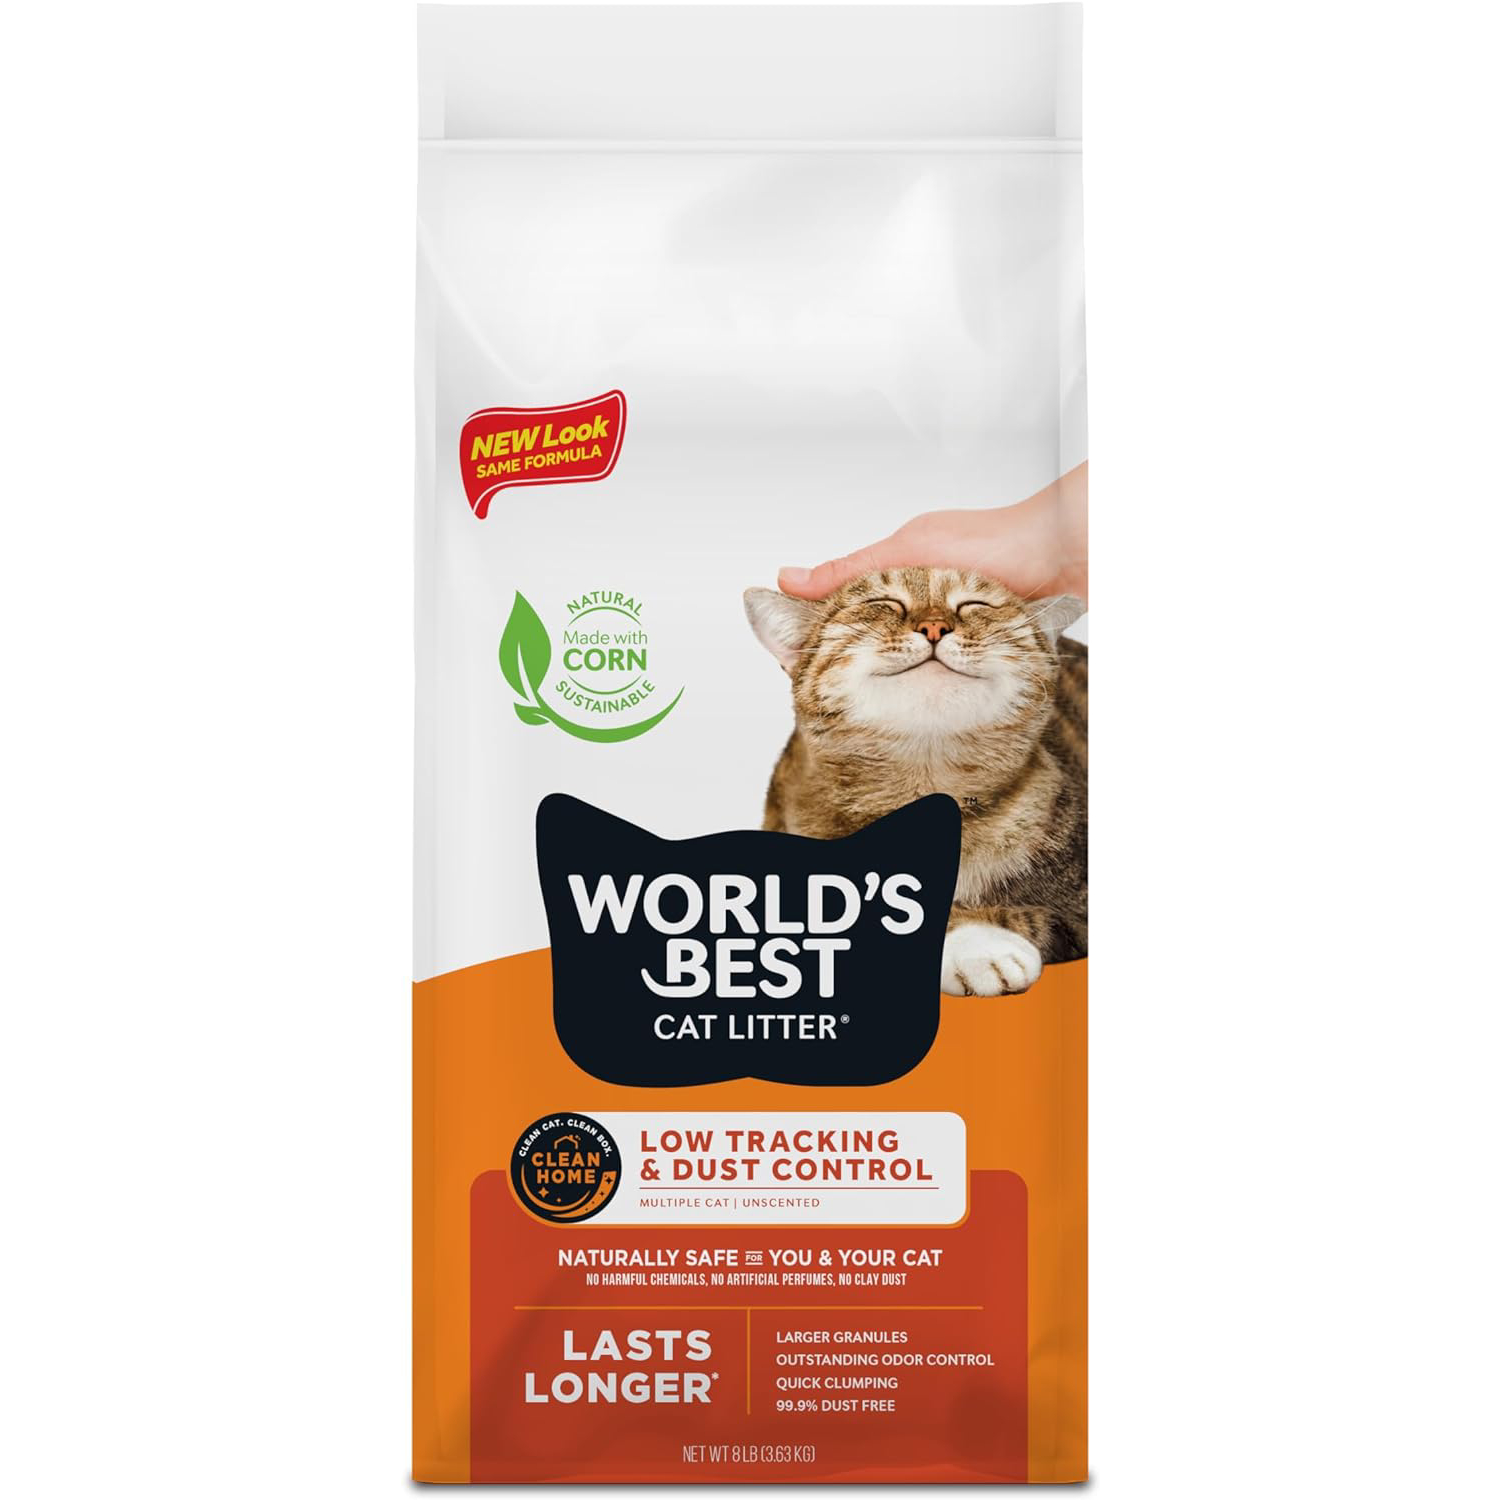 WORLD_S BEST CAT LITTER Low Tracking & Dust Control Multiple Cat Unscented 8-Pounds - Natural Ingredients, Quick Clumping, Flushable & Made in USA - Long-Lasting Odor Control & Easy Scooping new